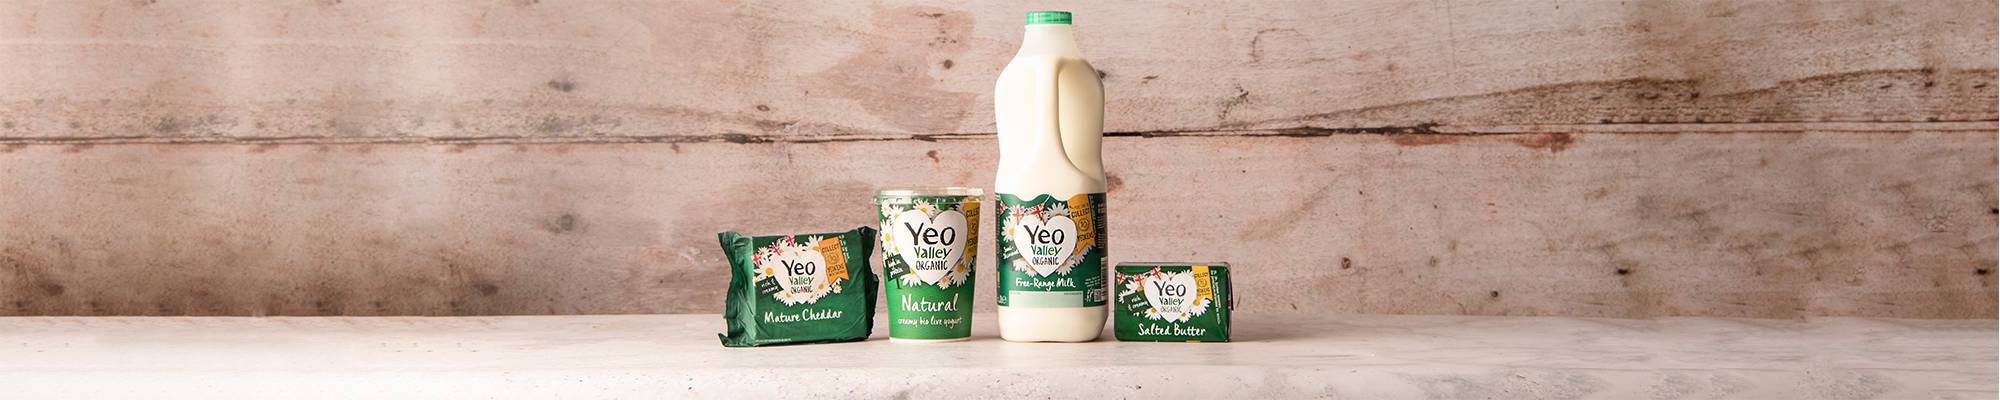 Yeo Valley Organic dairy products